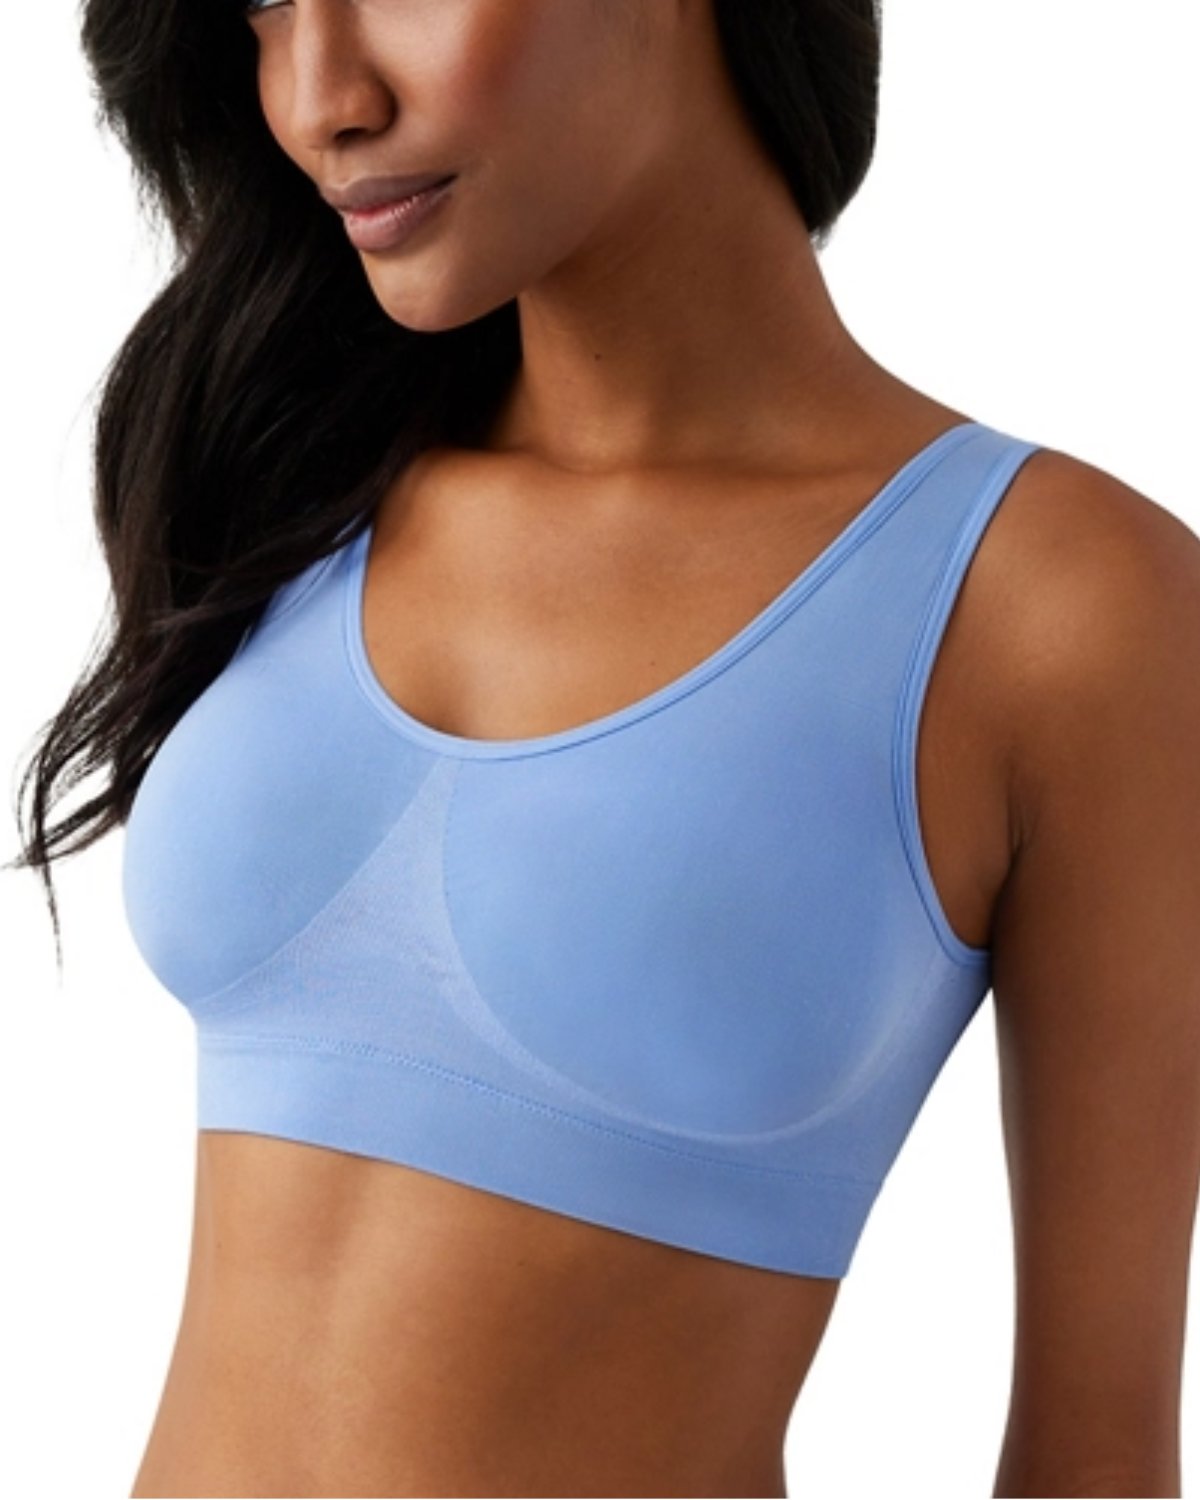 B-Smooth® Bralette 835575  Free Shipping at